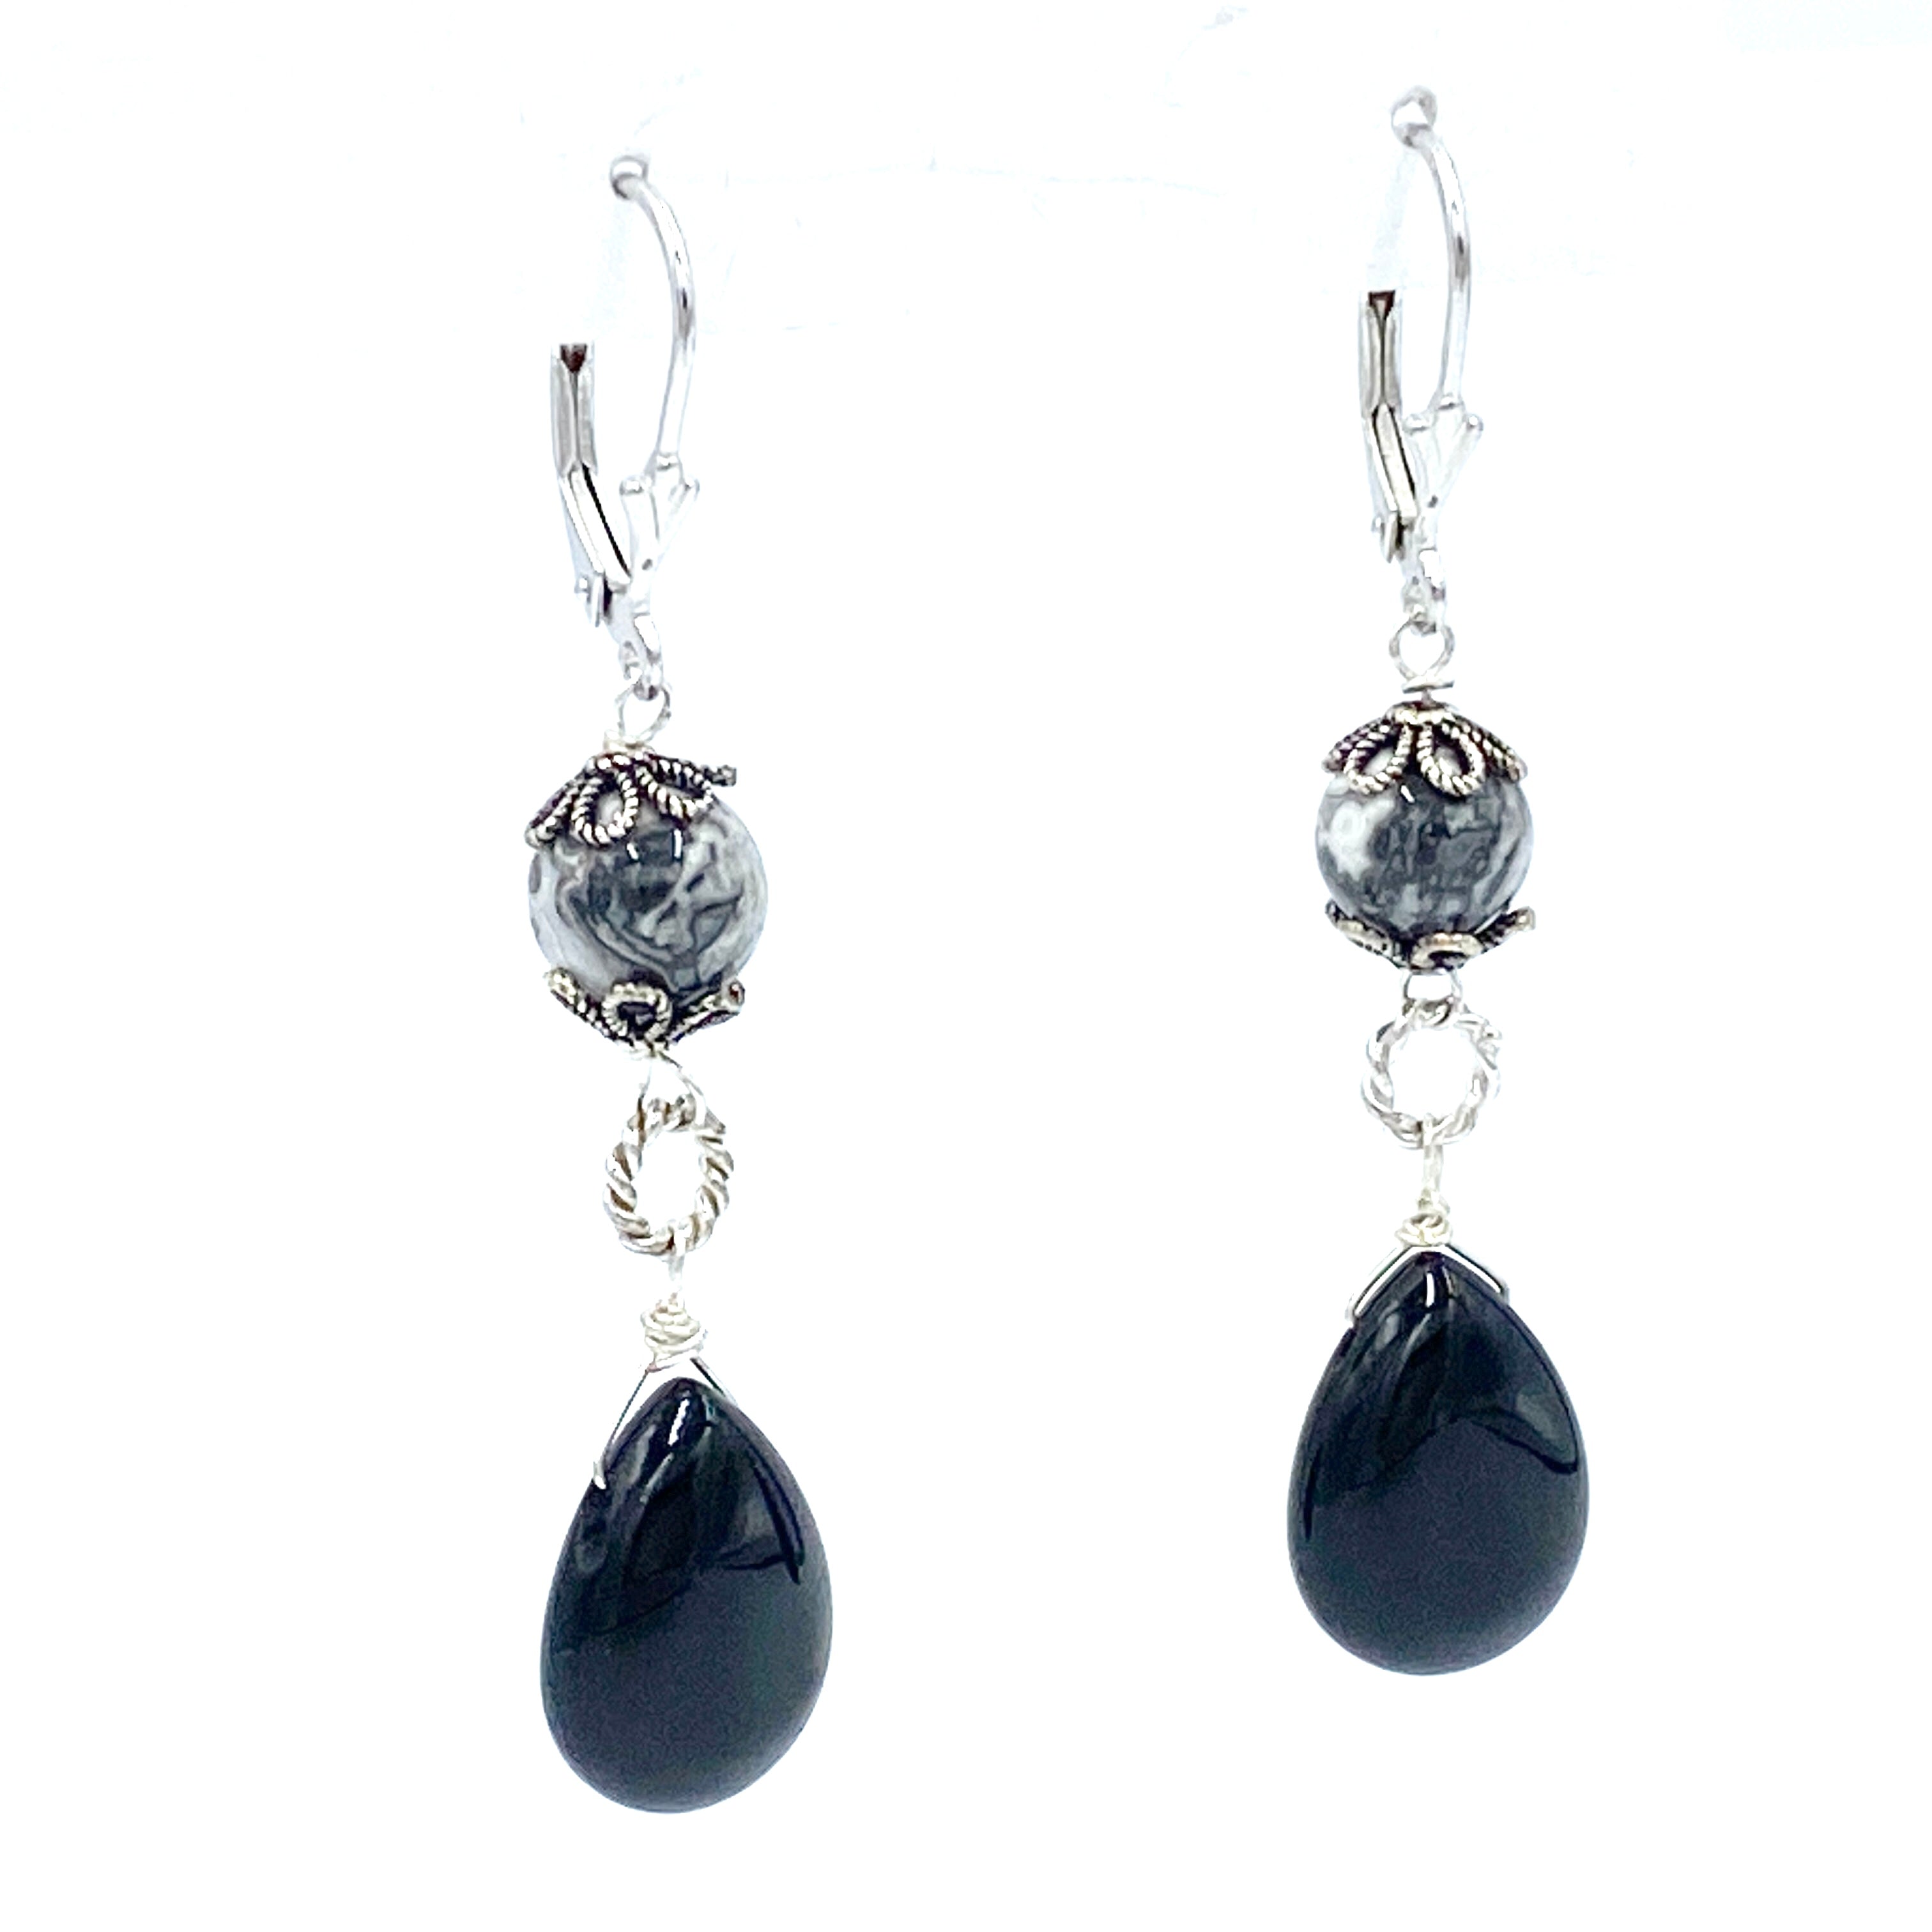 Joanna Bisley Black Onyx drop with Crazy Lace Agate and Sterling Silver earrings - 0